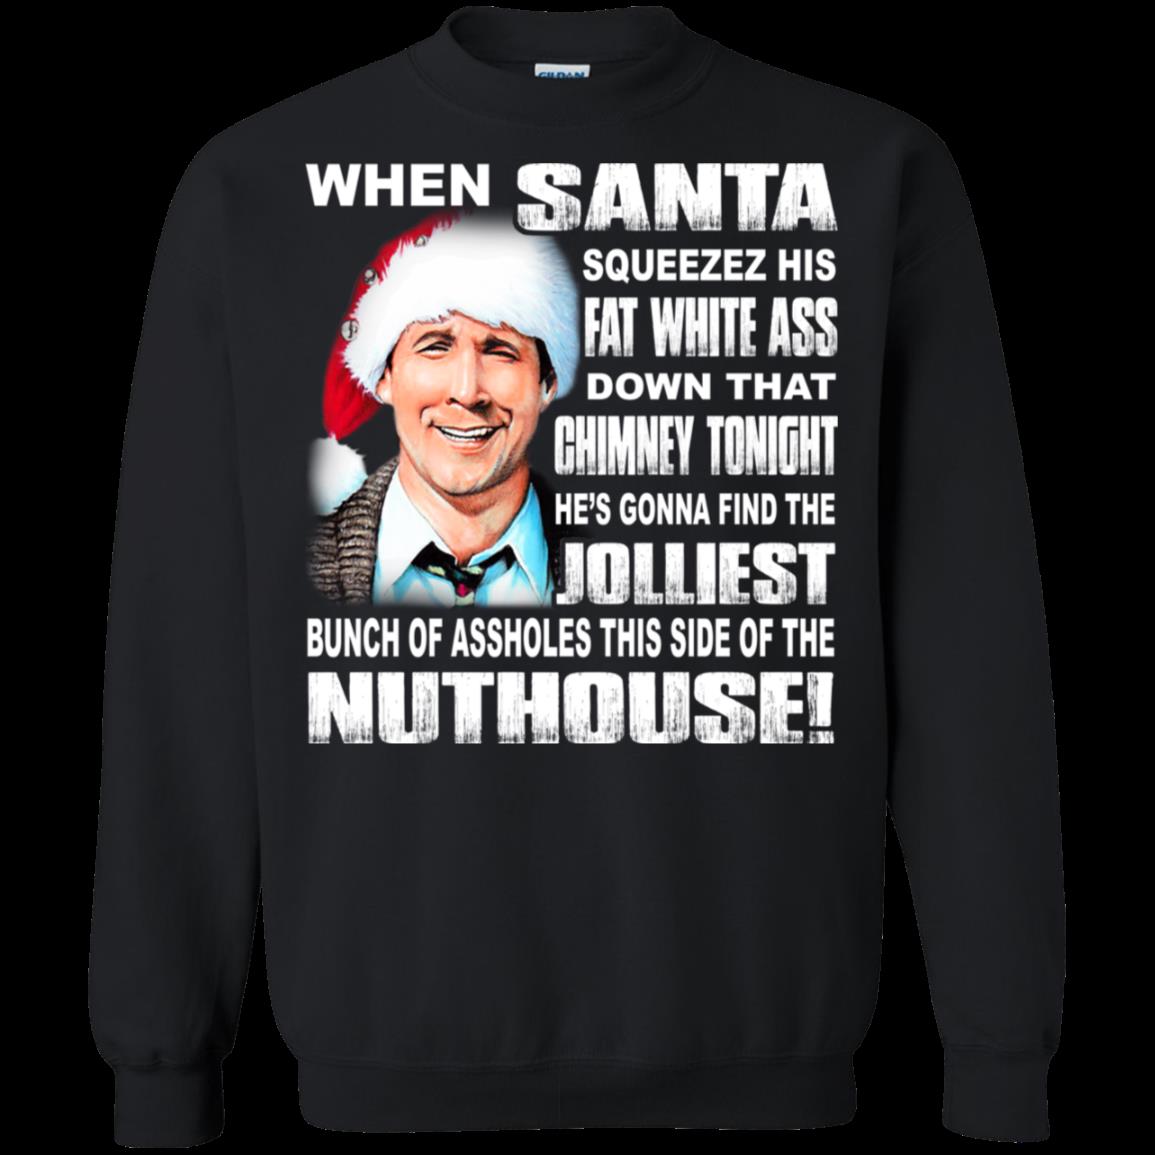 National Lampoon’s Christmas Vacation Shirts When Santa Squeezez Fat Ass